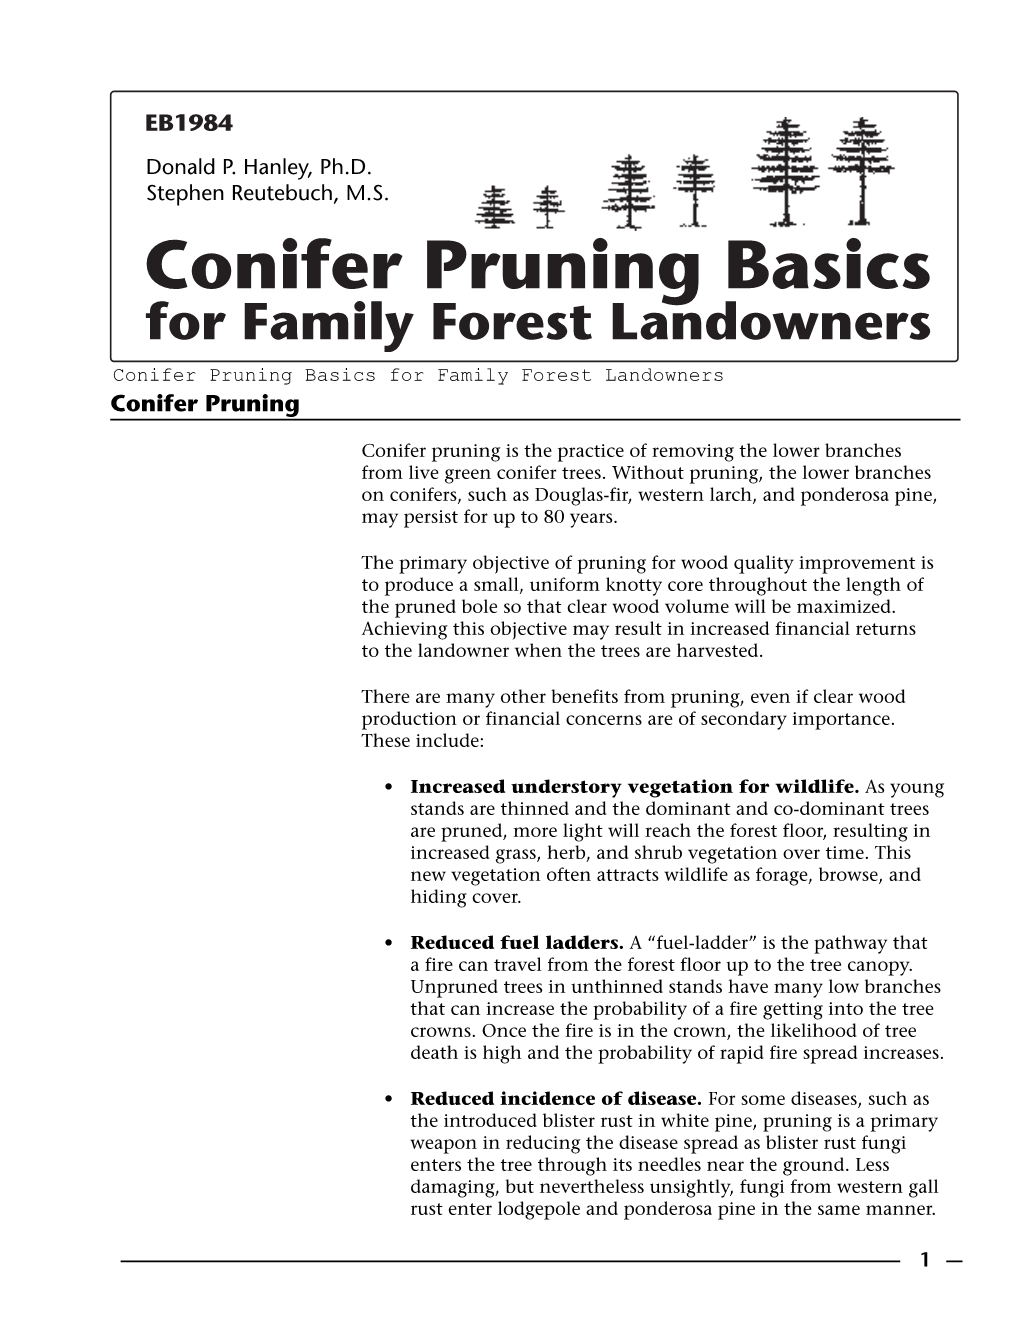 Conifer Pruning Basics for Family Forest Landowners